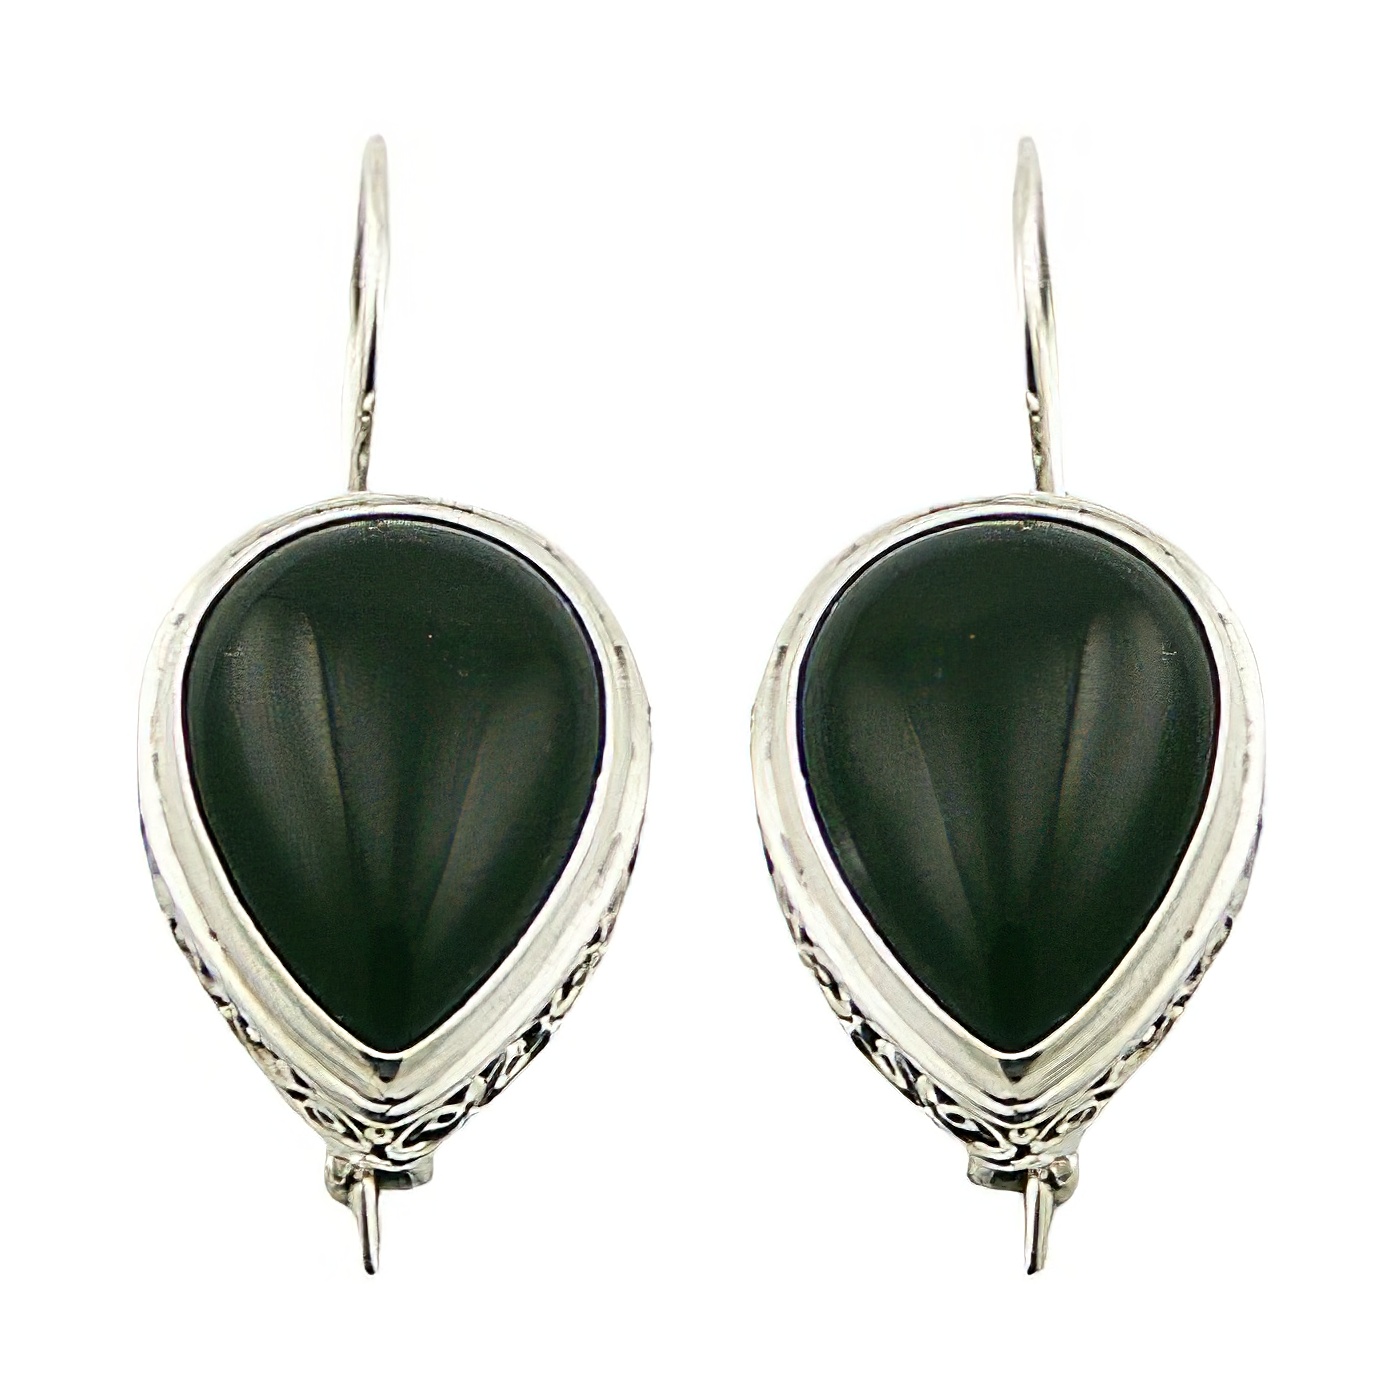 Gorgeous black agate cabochon gemstone ajoure sterling silver earrings by BeYindi 